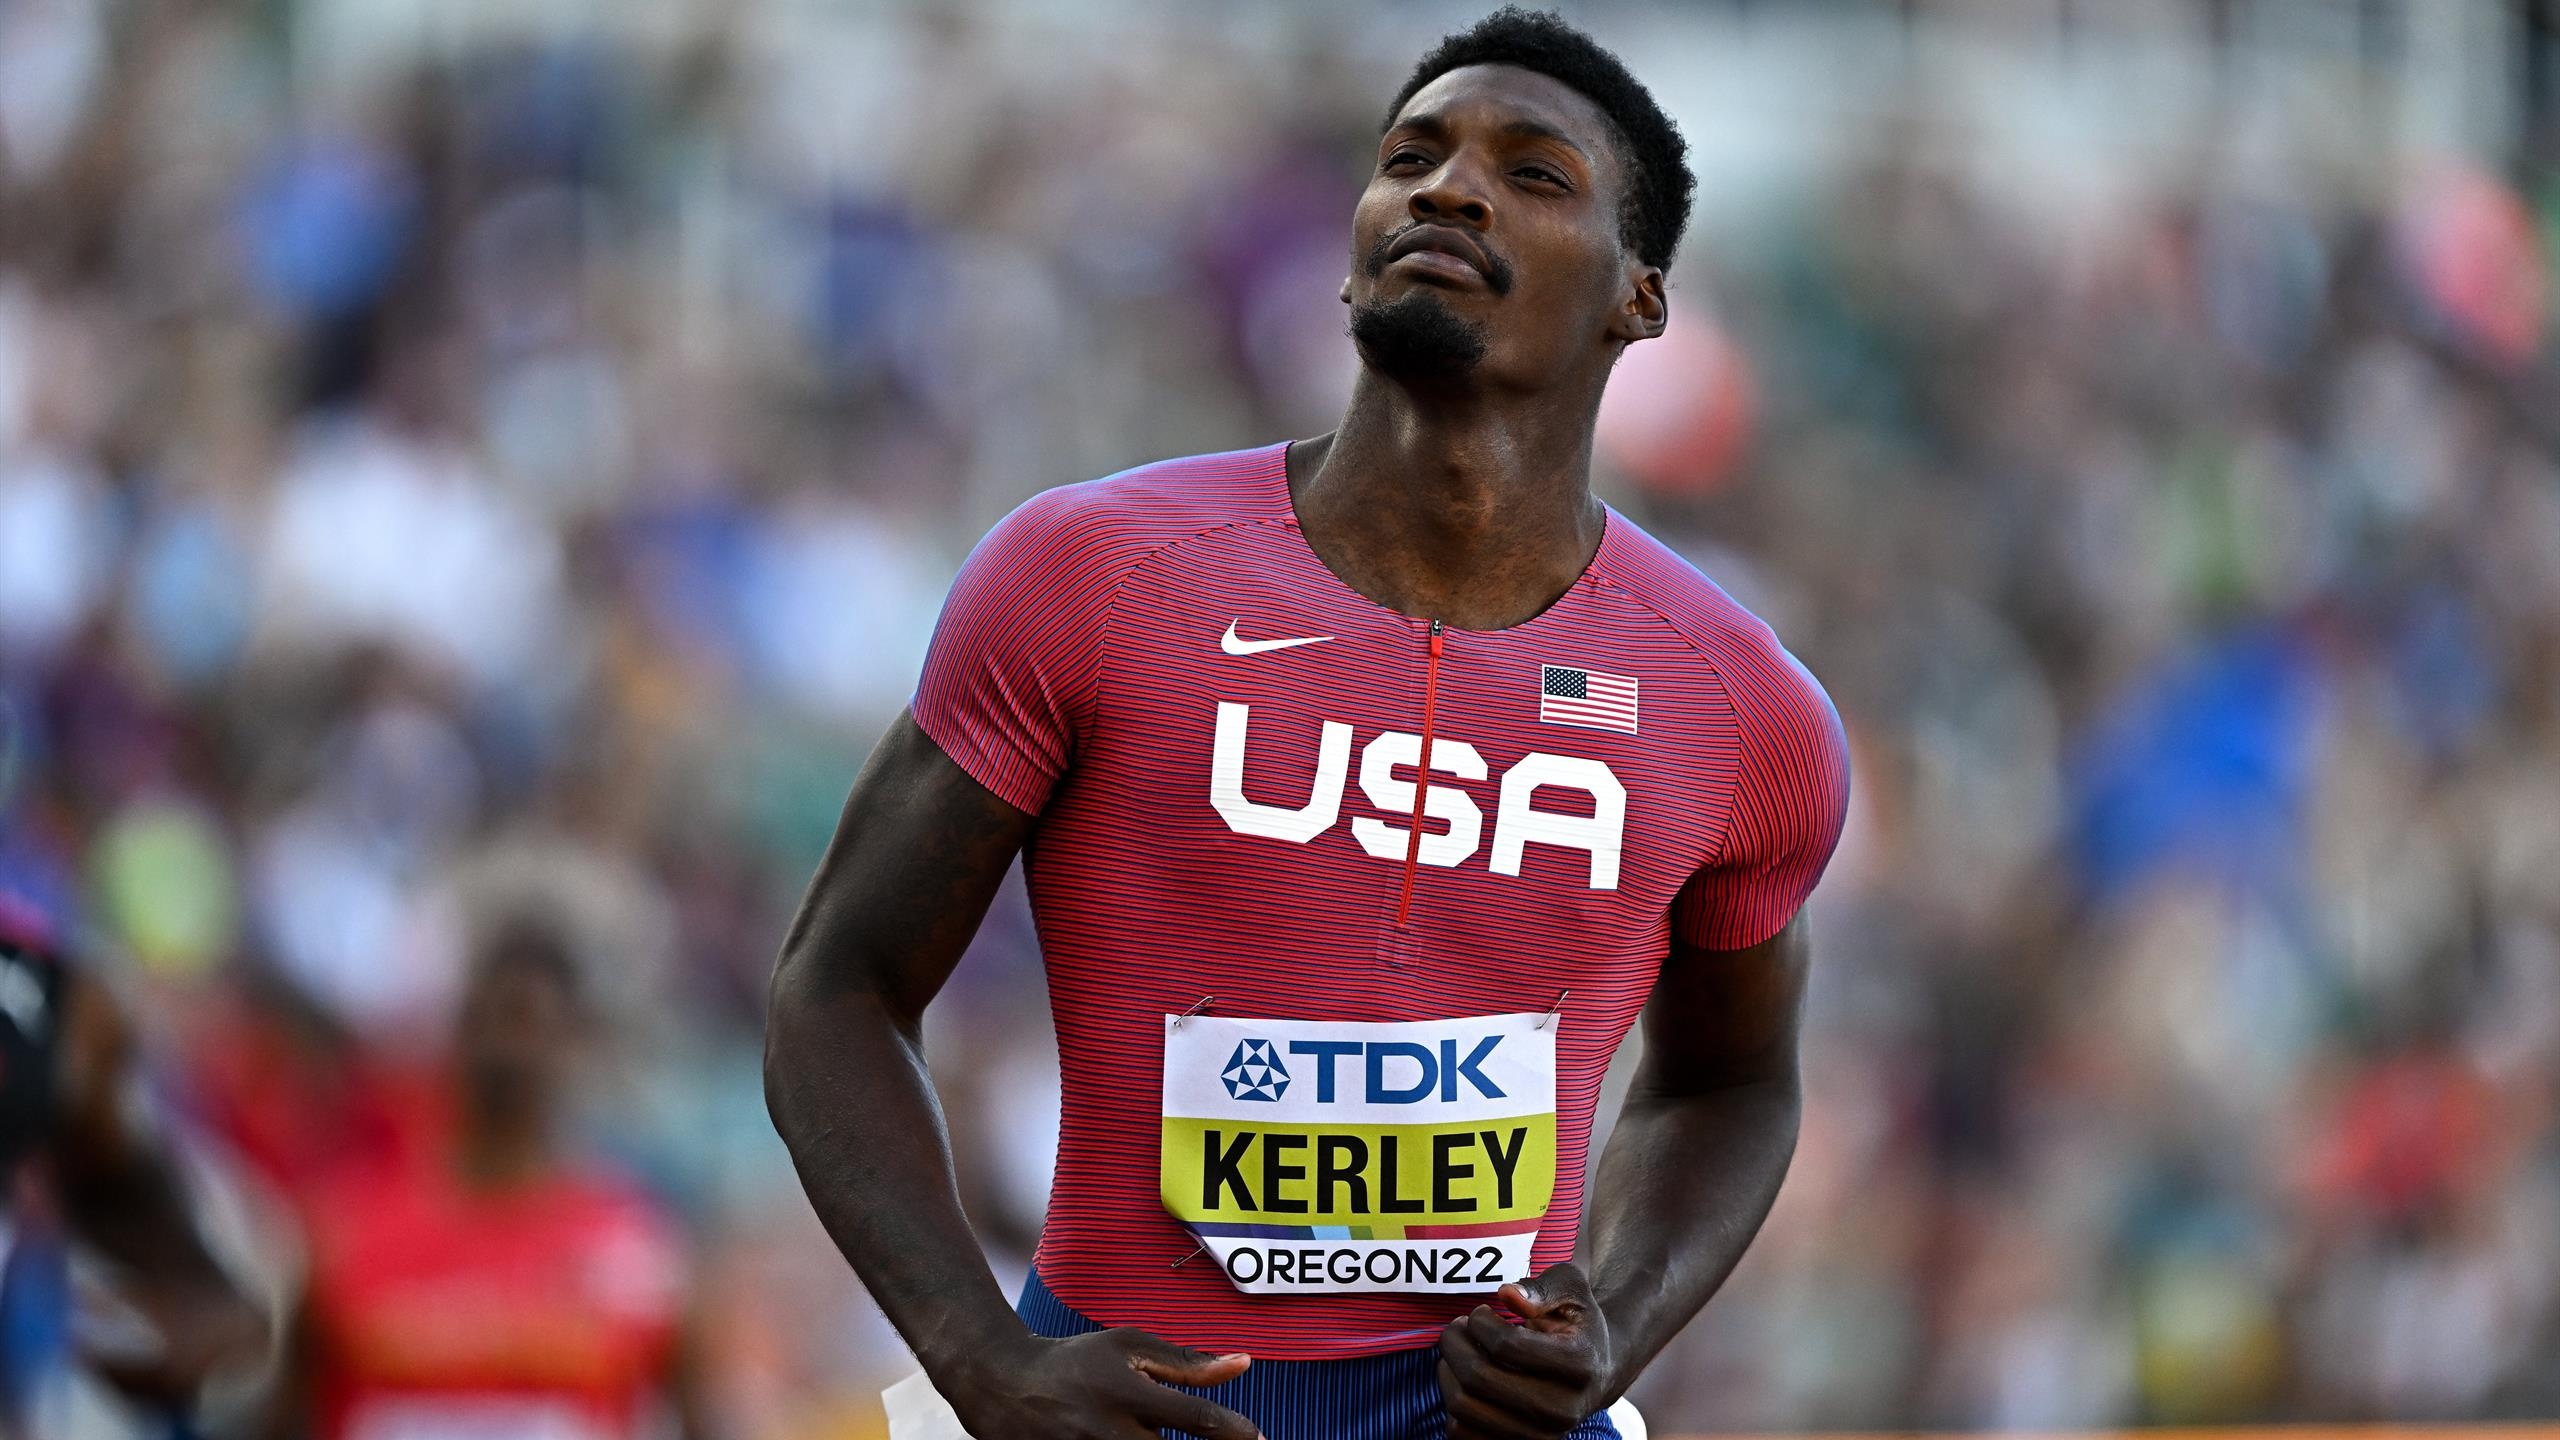 Fred Kerley, Admirable sprinter, Olympic medal contender, Track and field, 2560x1440 HD Desktop